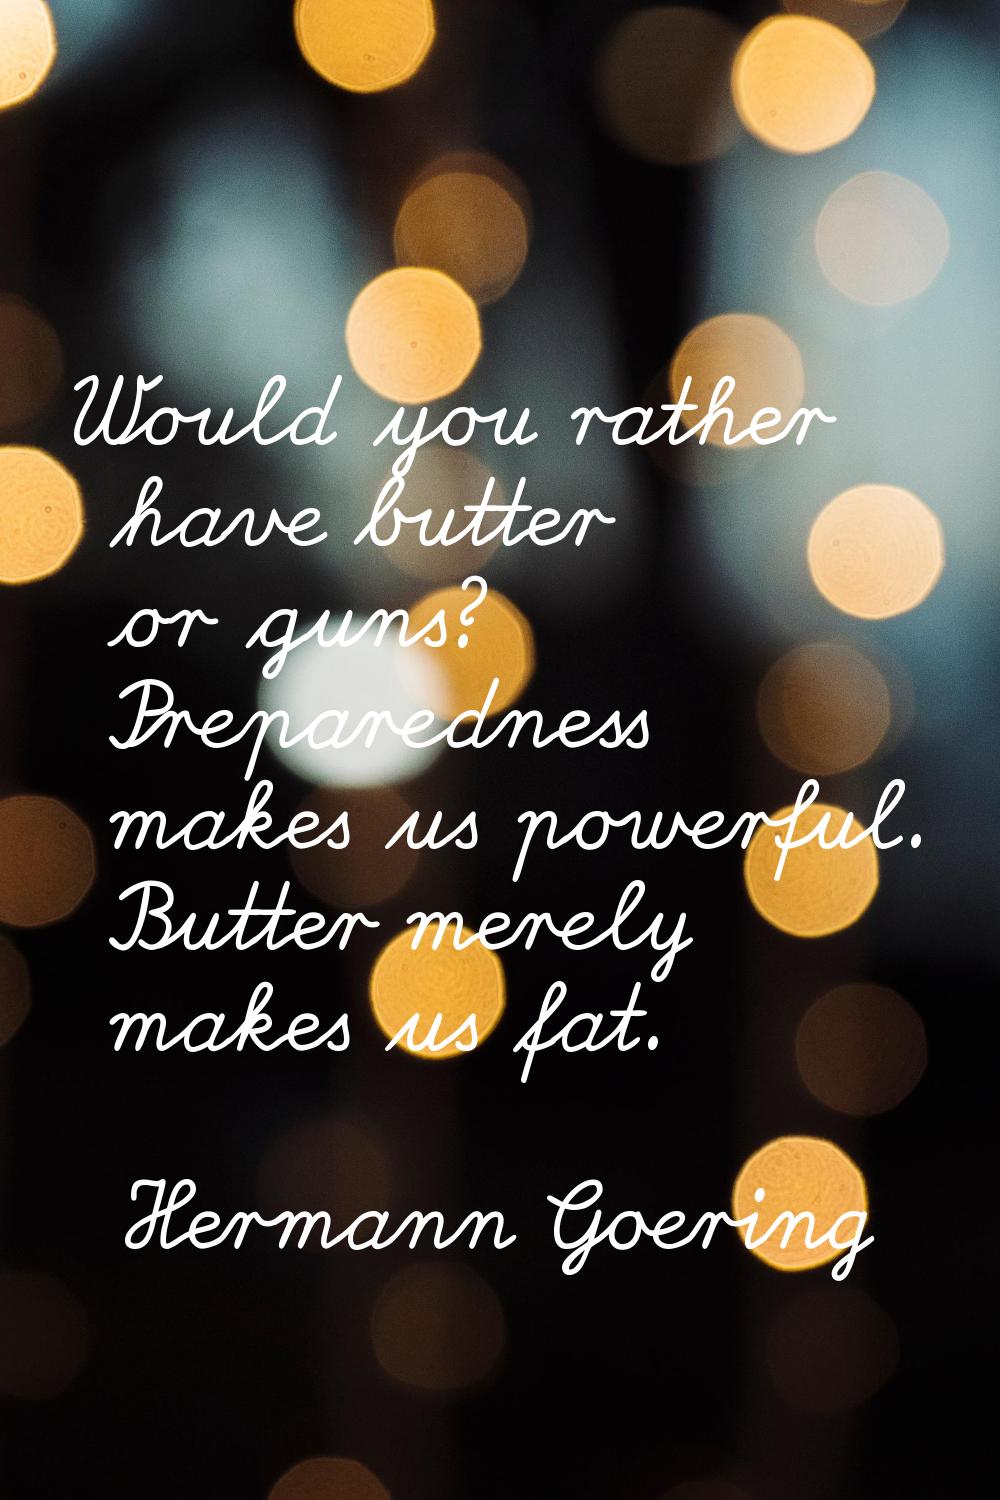 Would you rather have butter or guns? Preparedness makes us powerful. Butter merely makes us fat.